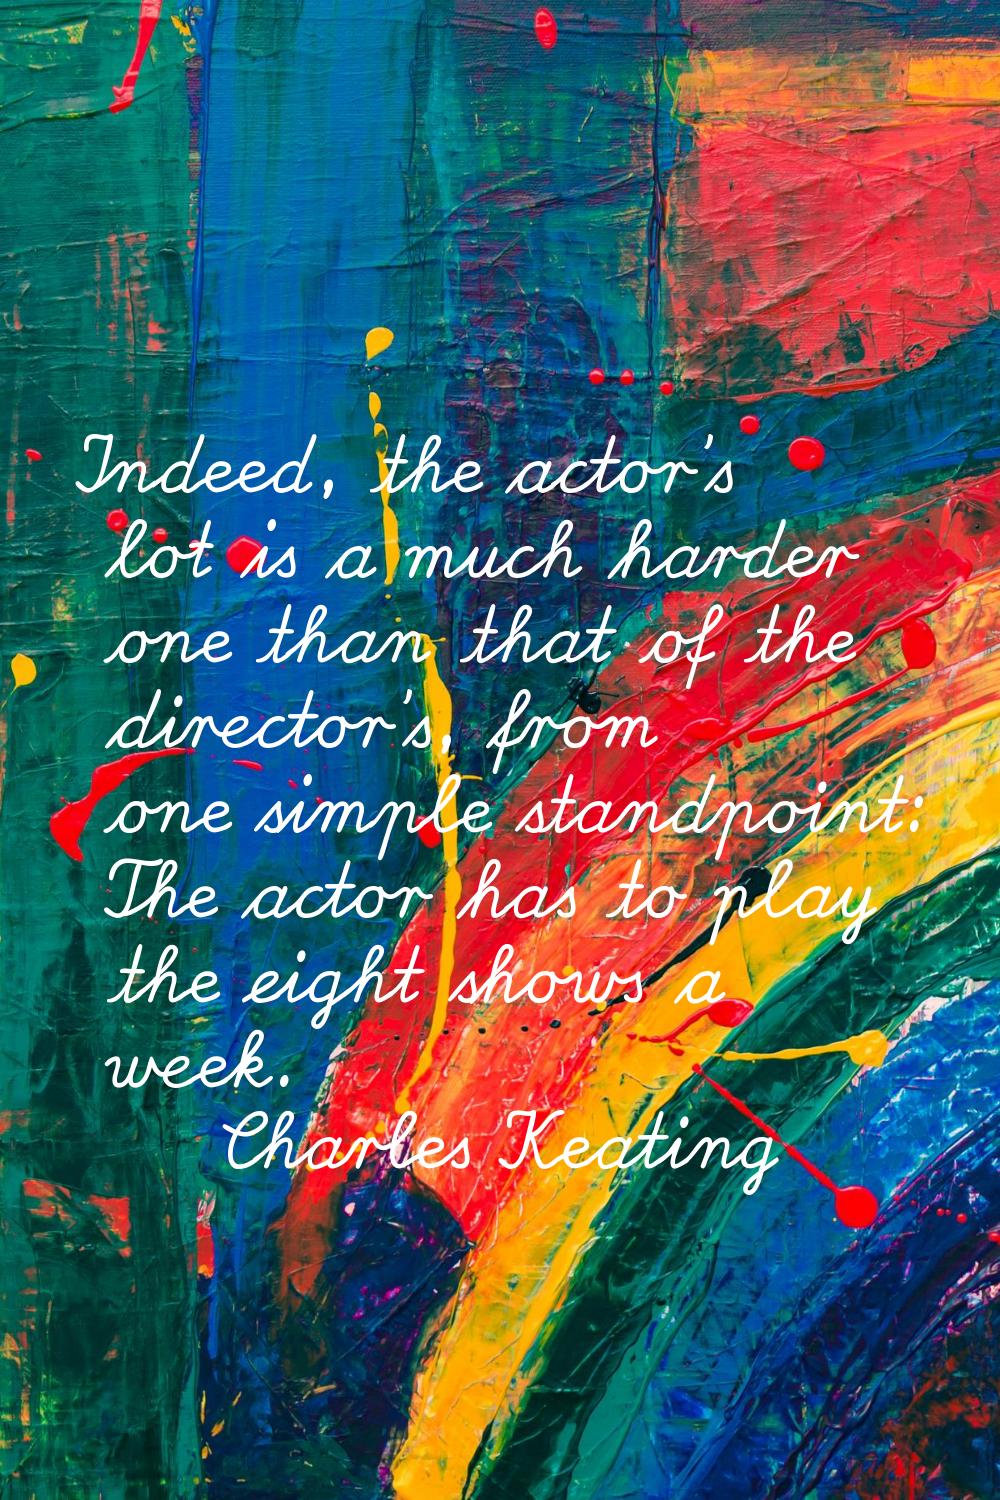 Indeed, the actor's lot is a much harder one than that of the director's, from one simple standpoin